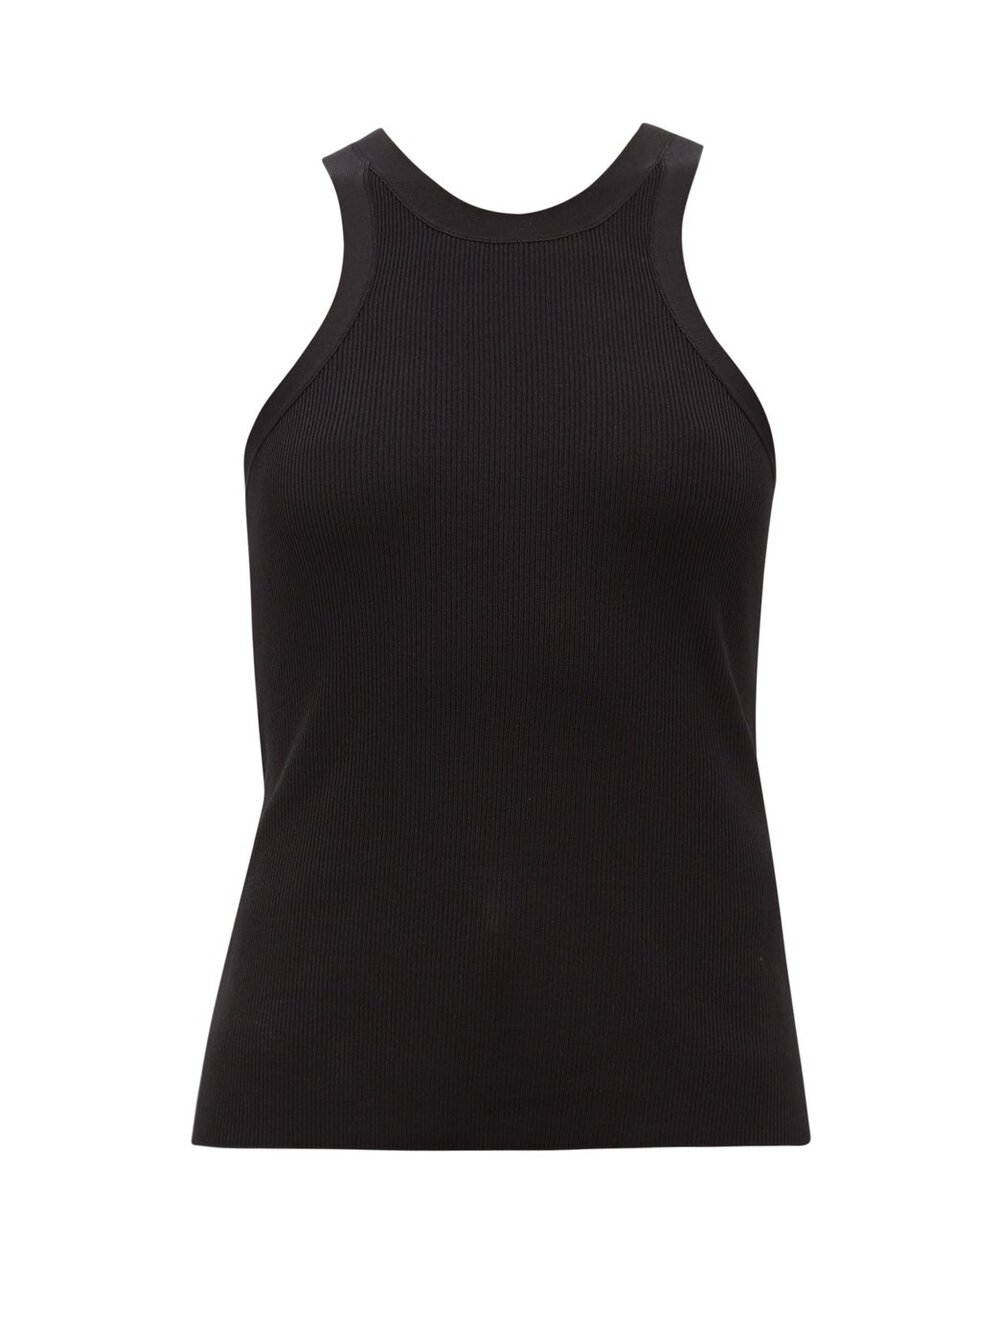 BLK FITTED TANK